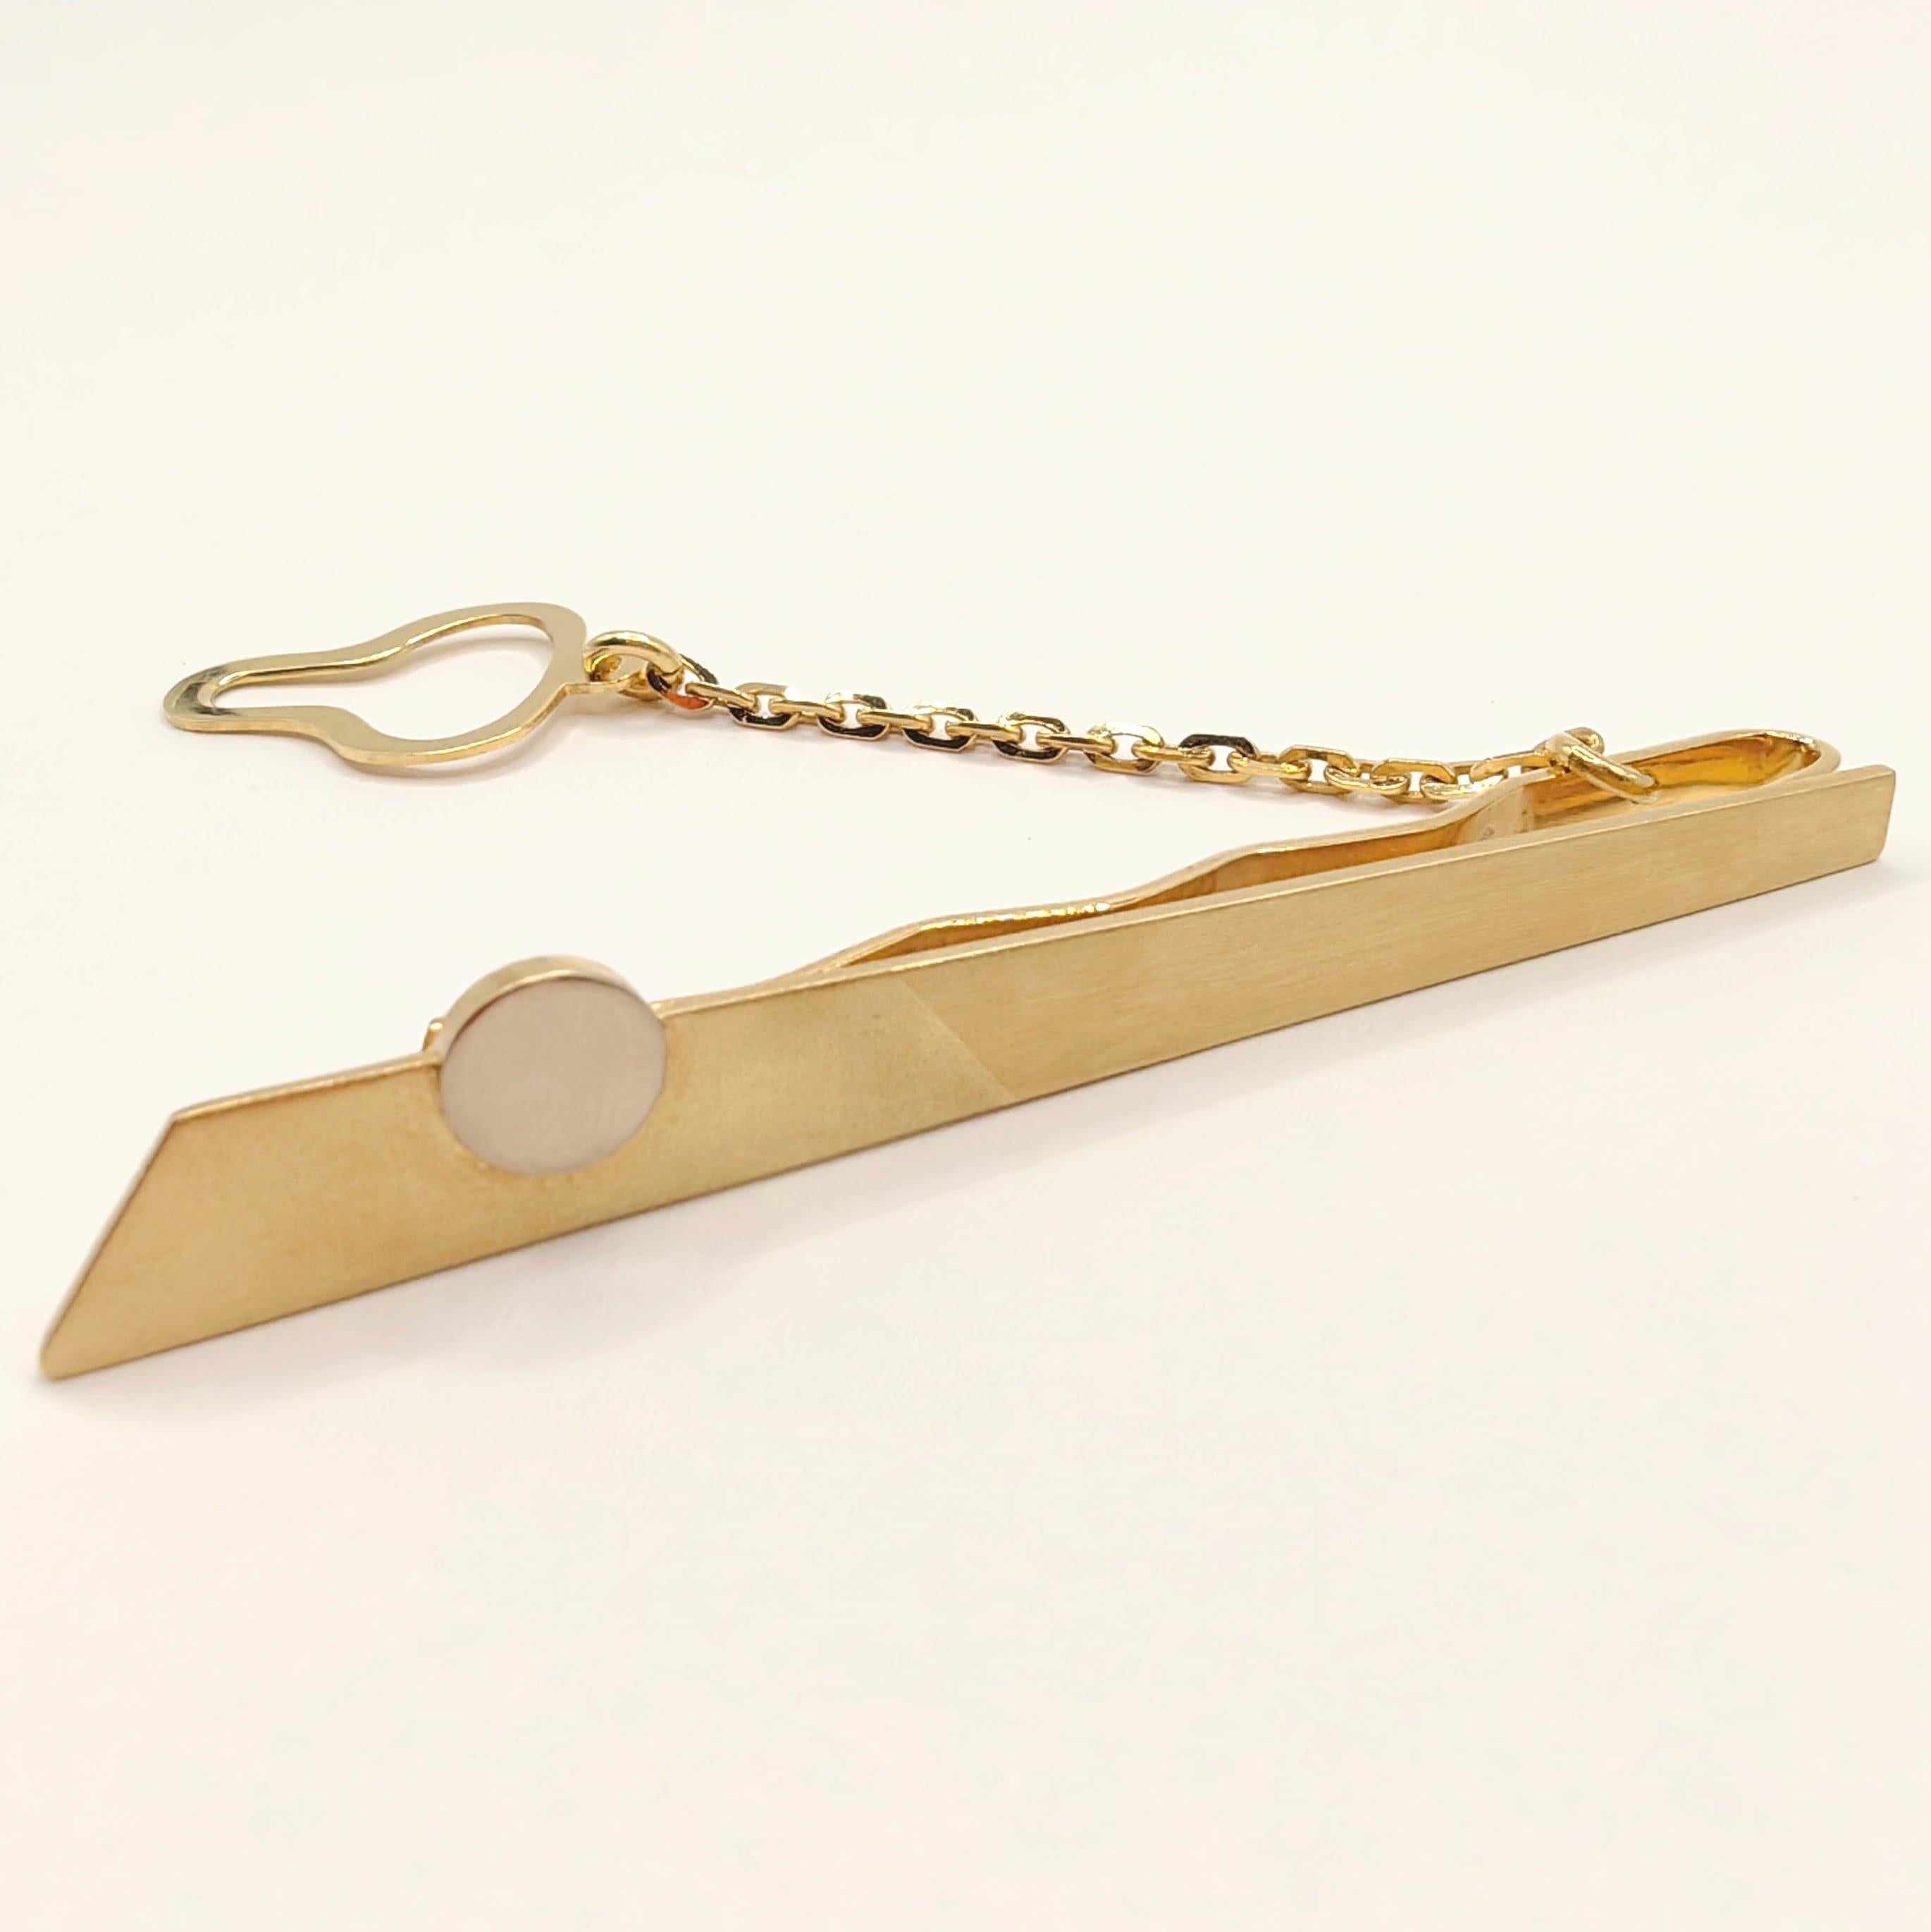 Introducing the Vintage Geometric Design Tie Clip With Chain in 18K Yellow & White Two-tone Gold. This elegant accessory combines sleek geometrical shapes with a sophisticated two-tone gold design, making it a perfect addition to your formal